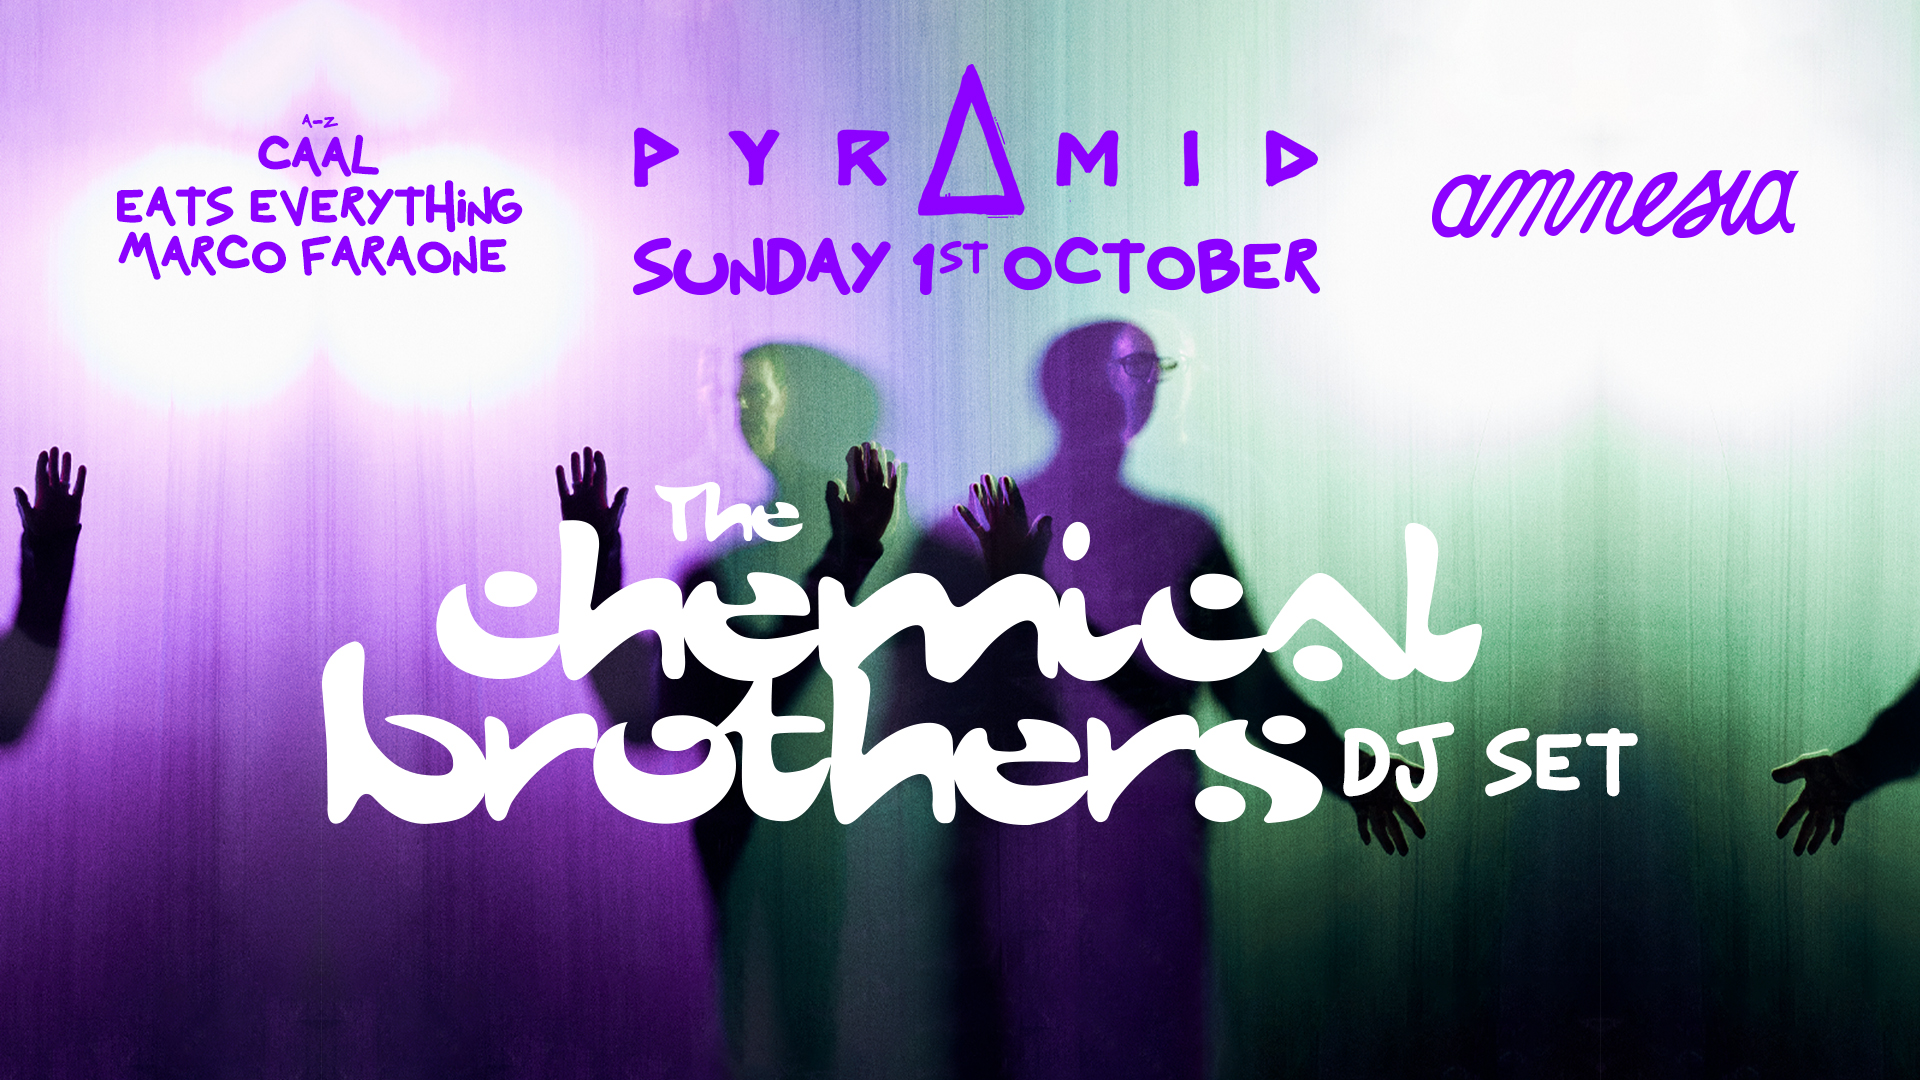 The Chemical Brothers return to Amnesia this October